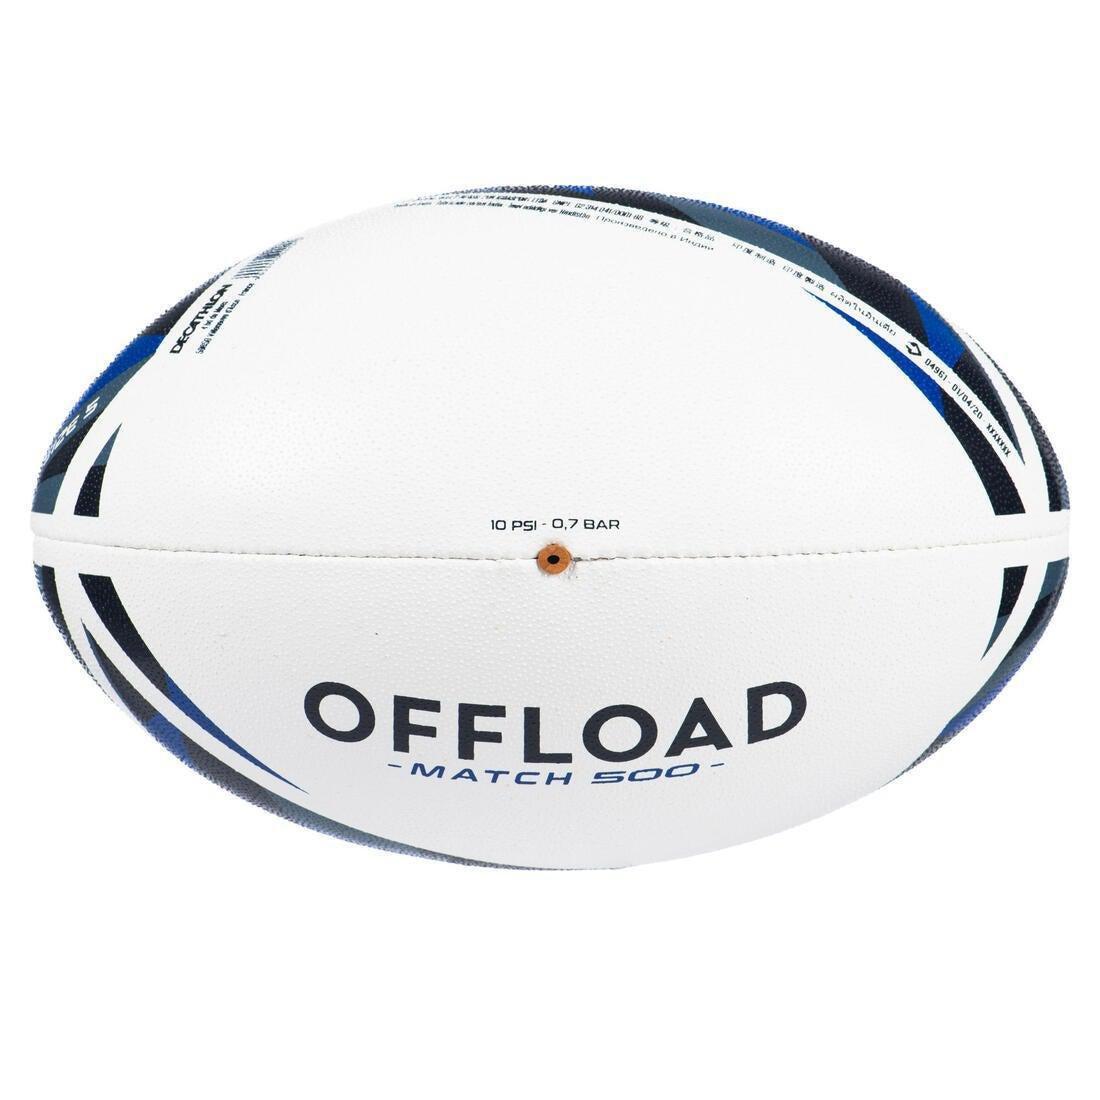 OFFLOAD - Rugby Ball - R500, White